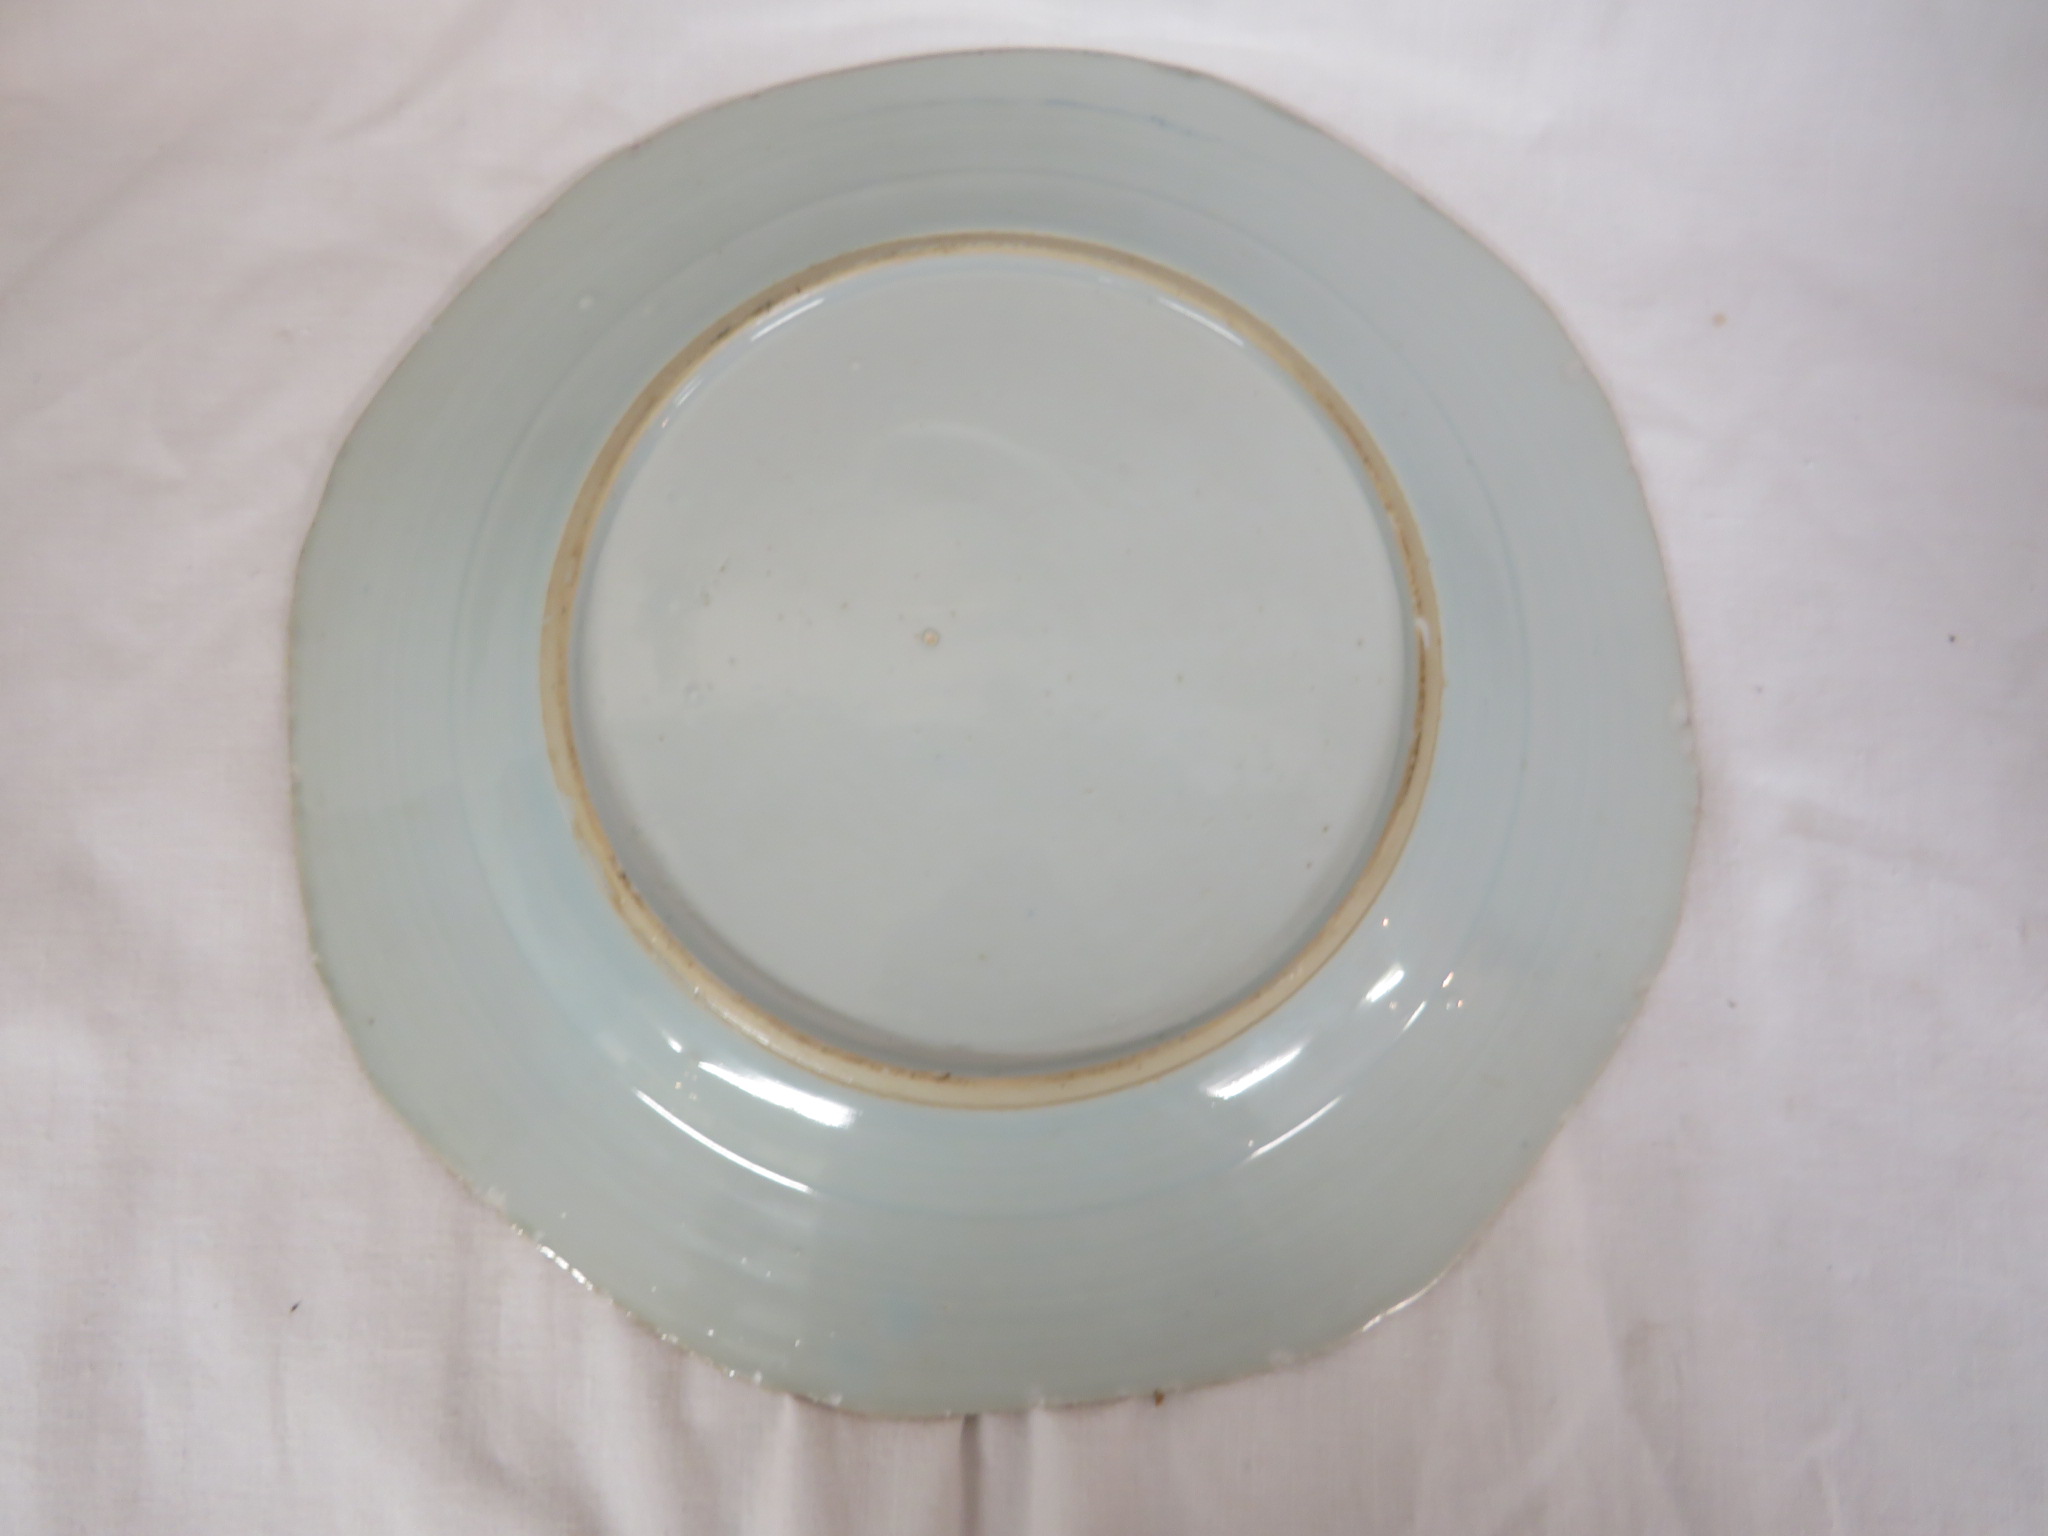 Two Chinese porcelain plates - the first with a wavy rim and extensive decoration in polychrome - Image 5 of 5